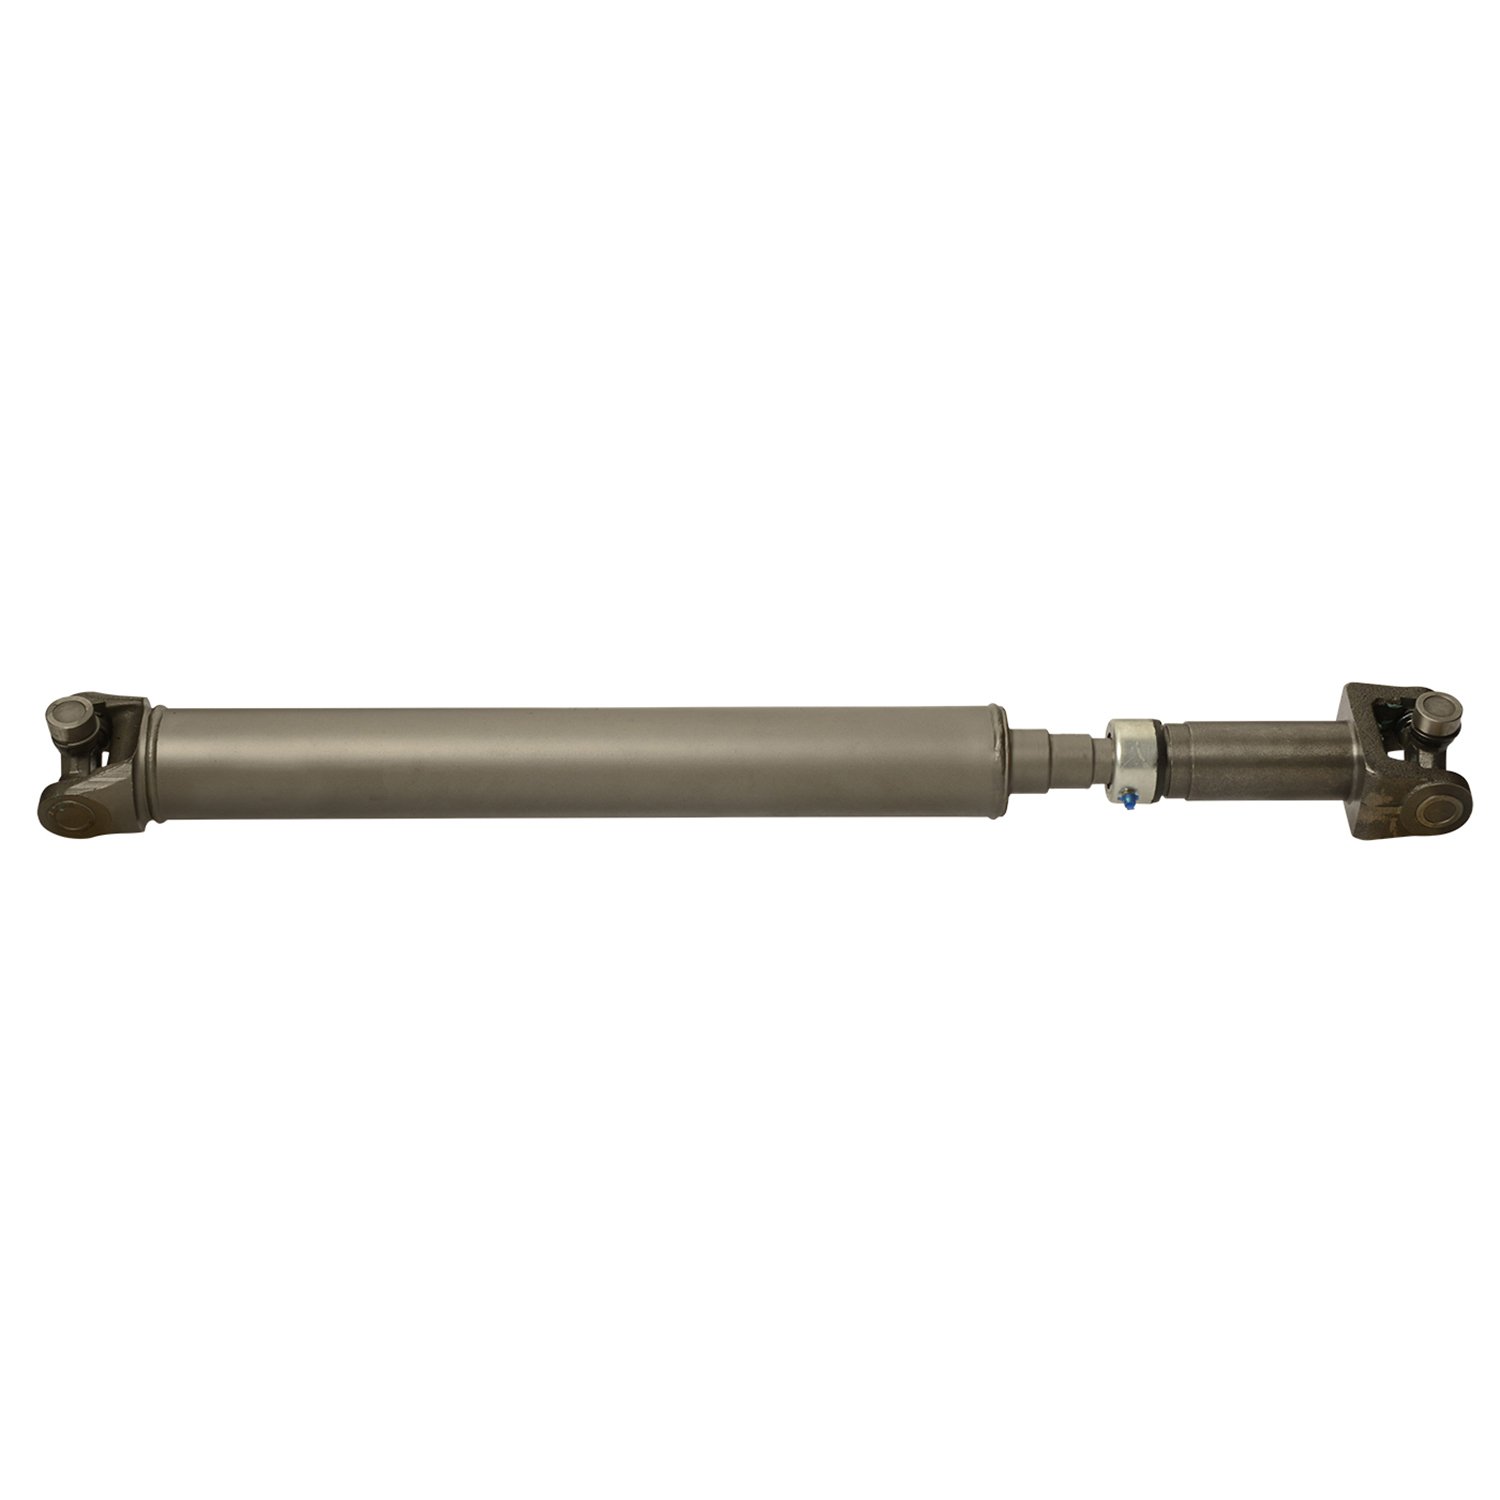 USA Standard ZDS9444 Front Driveshaft, For Bronco/F-Series Trucks, 39.5 in. Center-To-Center